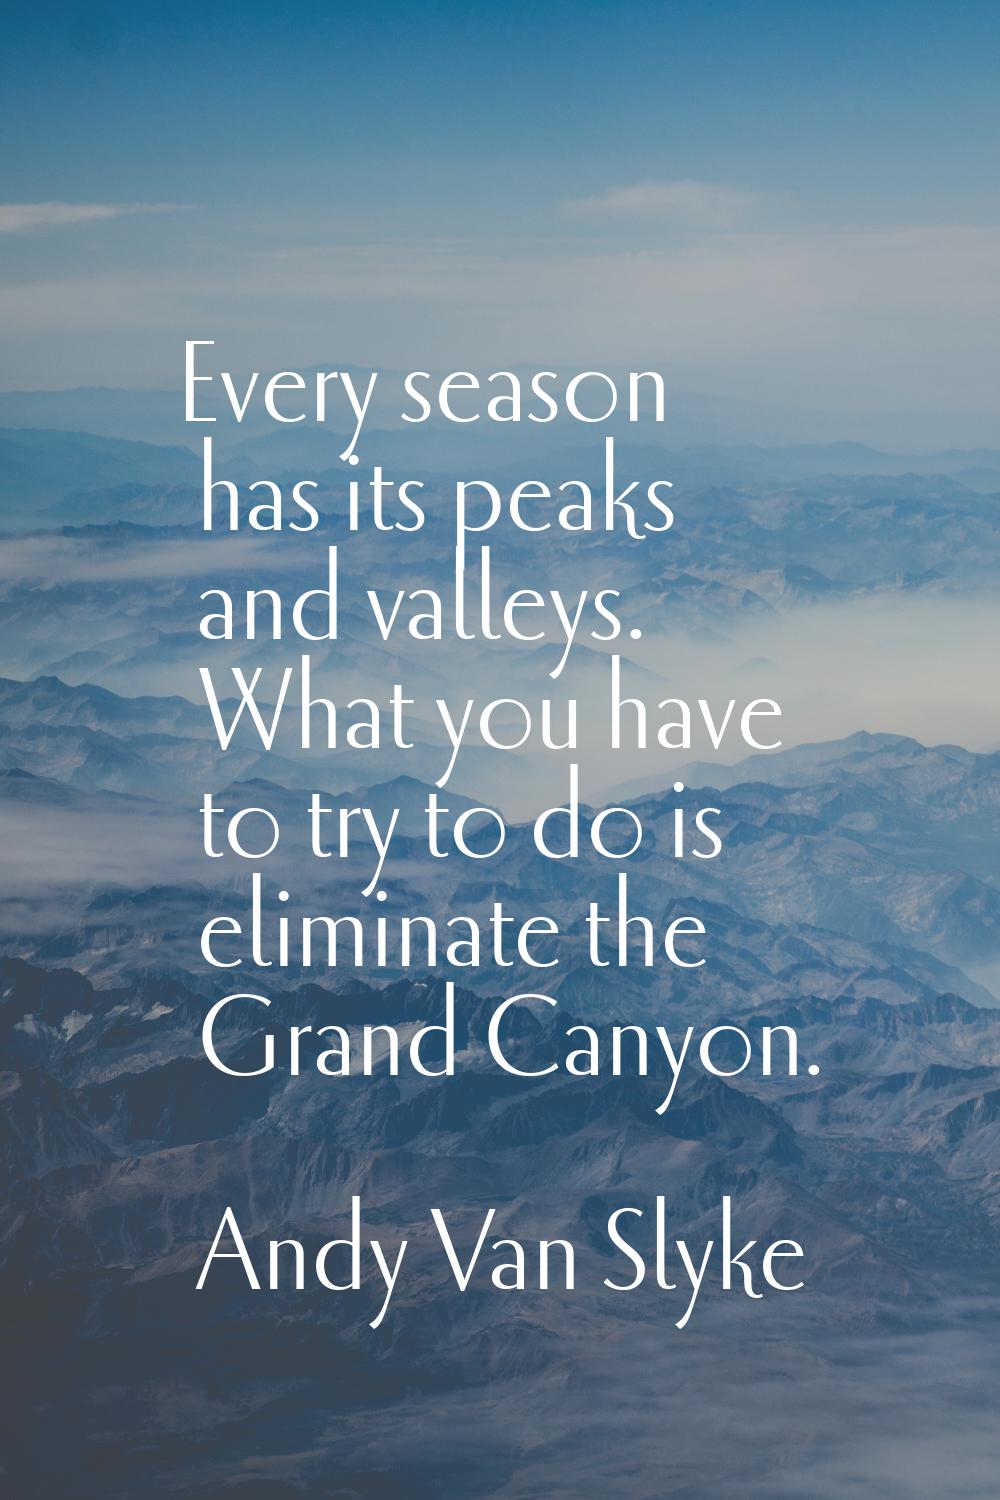 Every season has its peaks and valleys. What you have to try to do is eliminate the Grand Canyon.